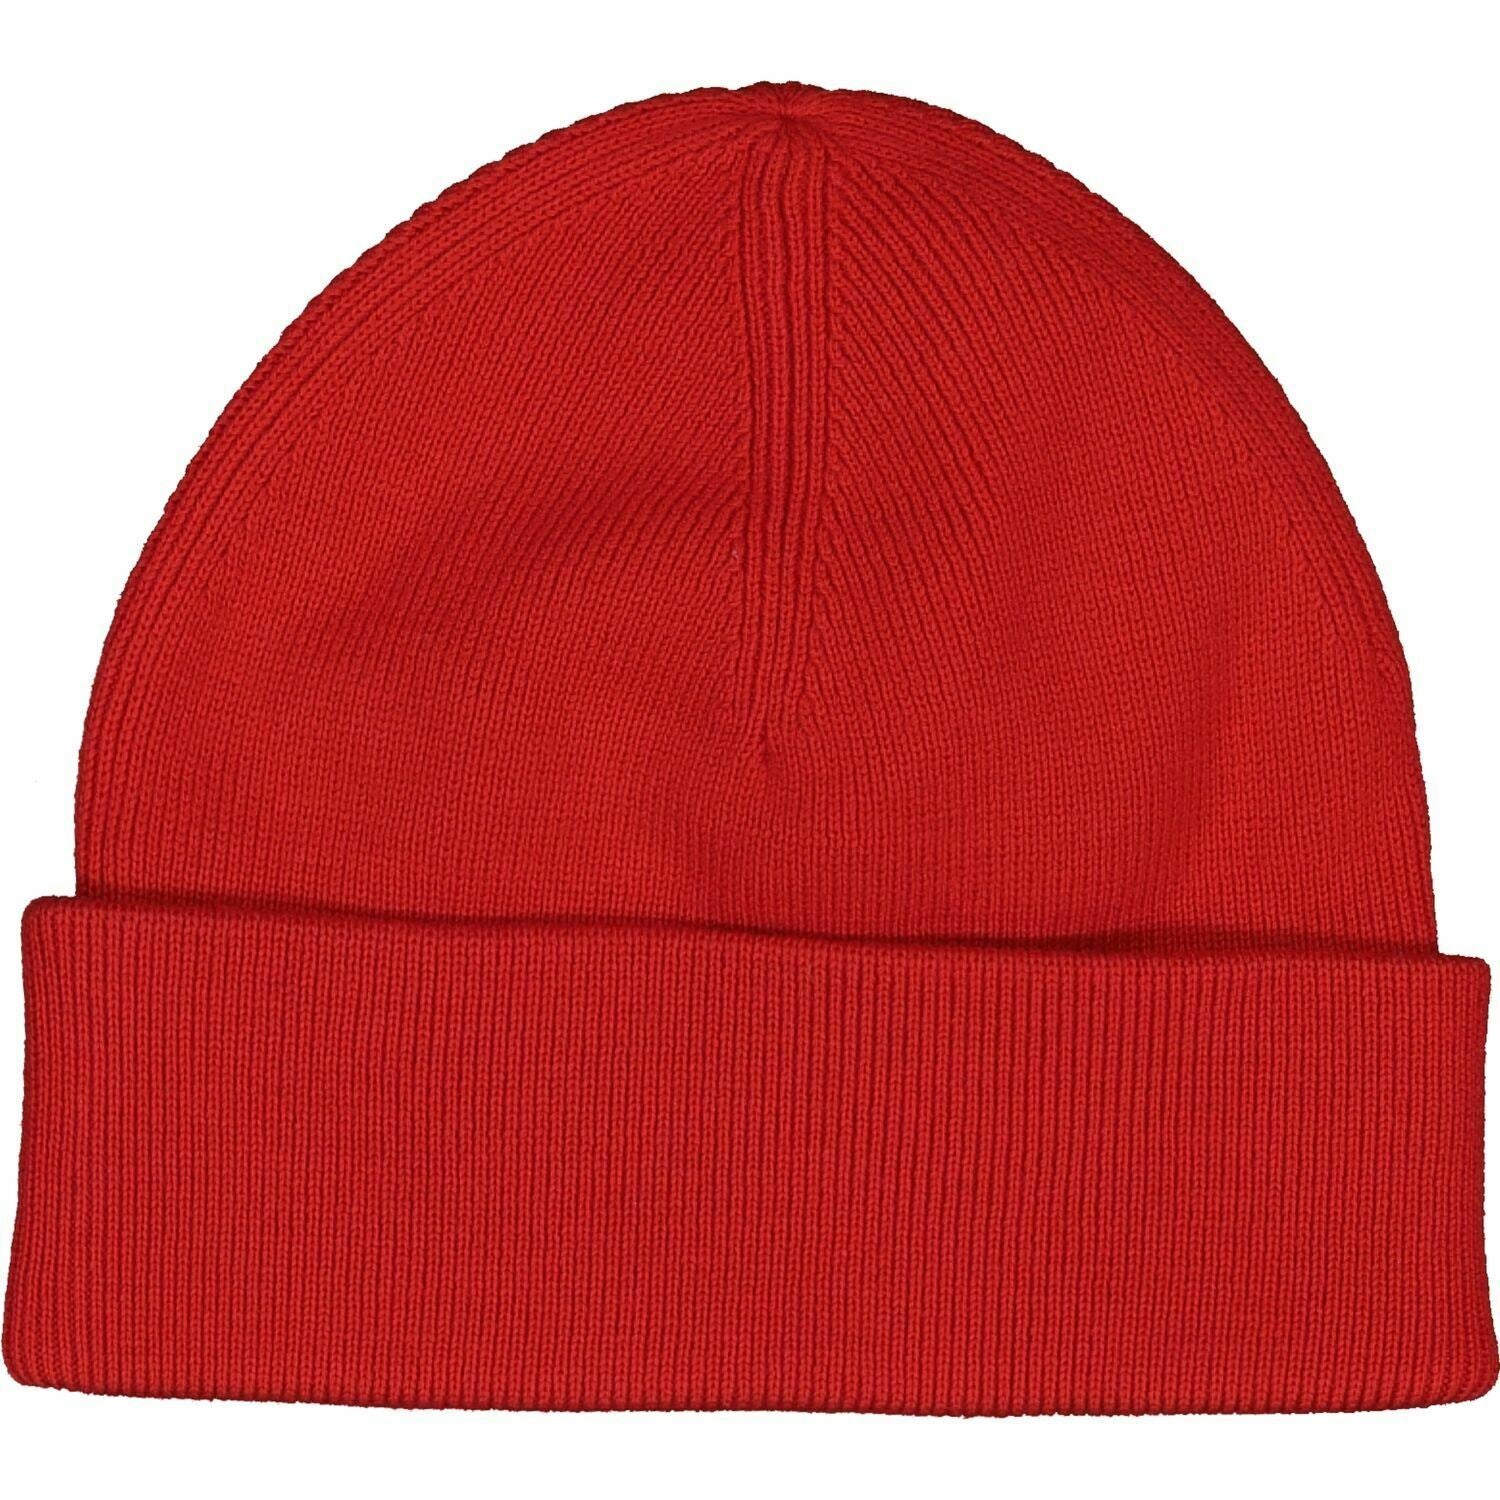 FRED PERRY Menâs Rib Knit 100% Merino Wool Logo Beanie Hat, Crimson Red